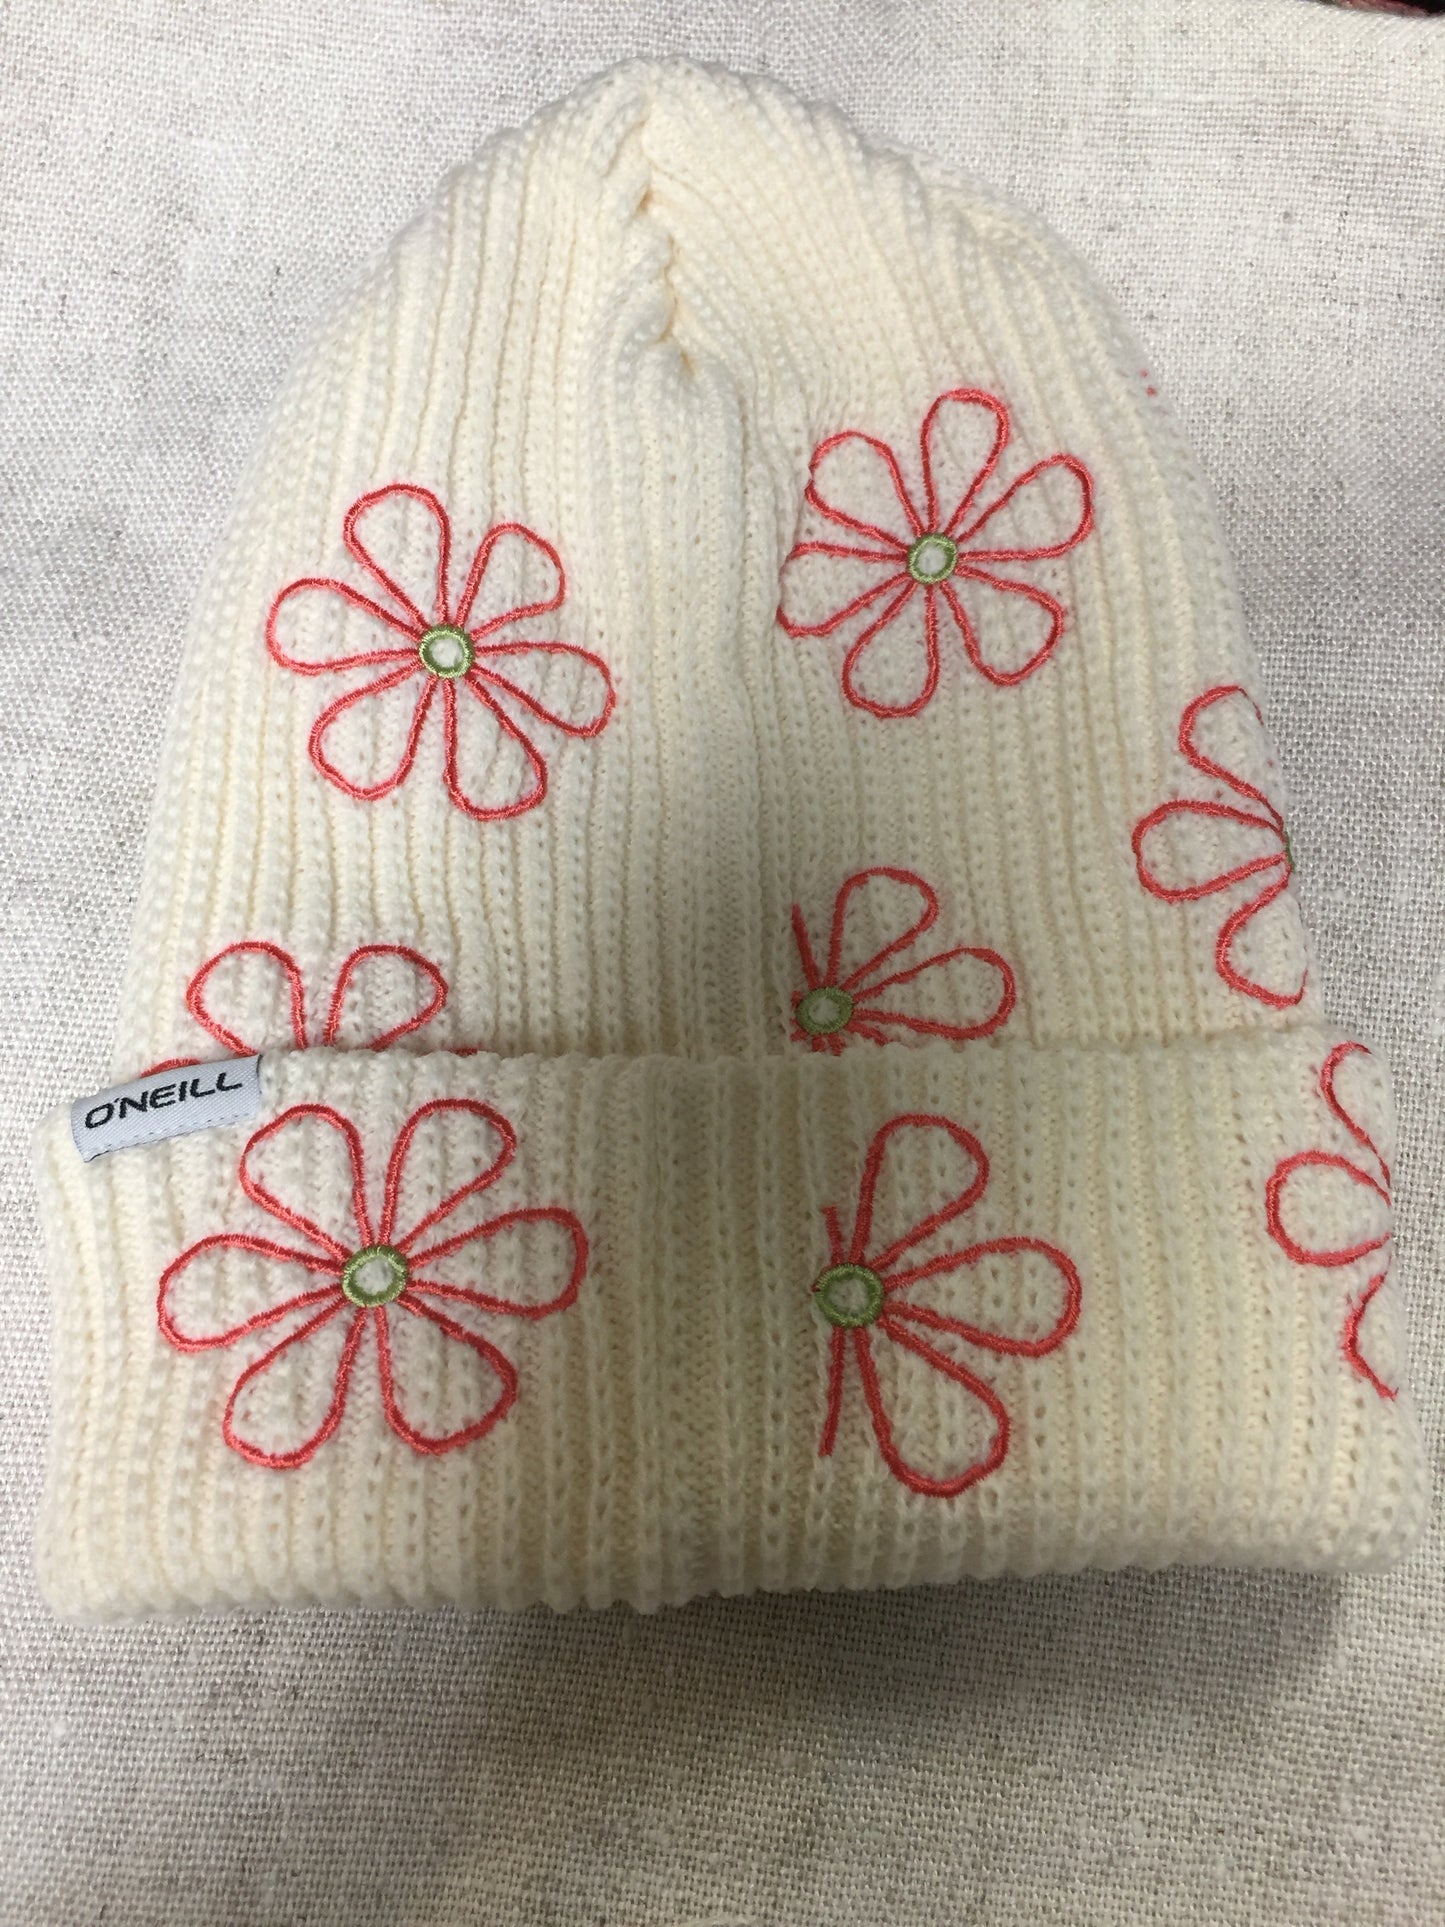 O'Neill Groceries Embroidery Beanie